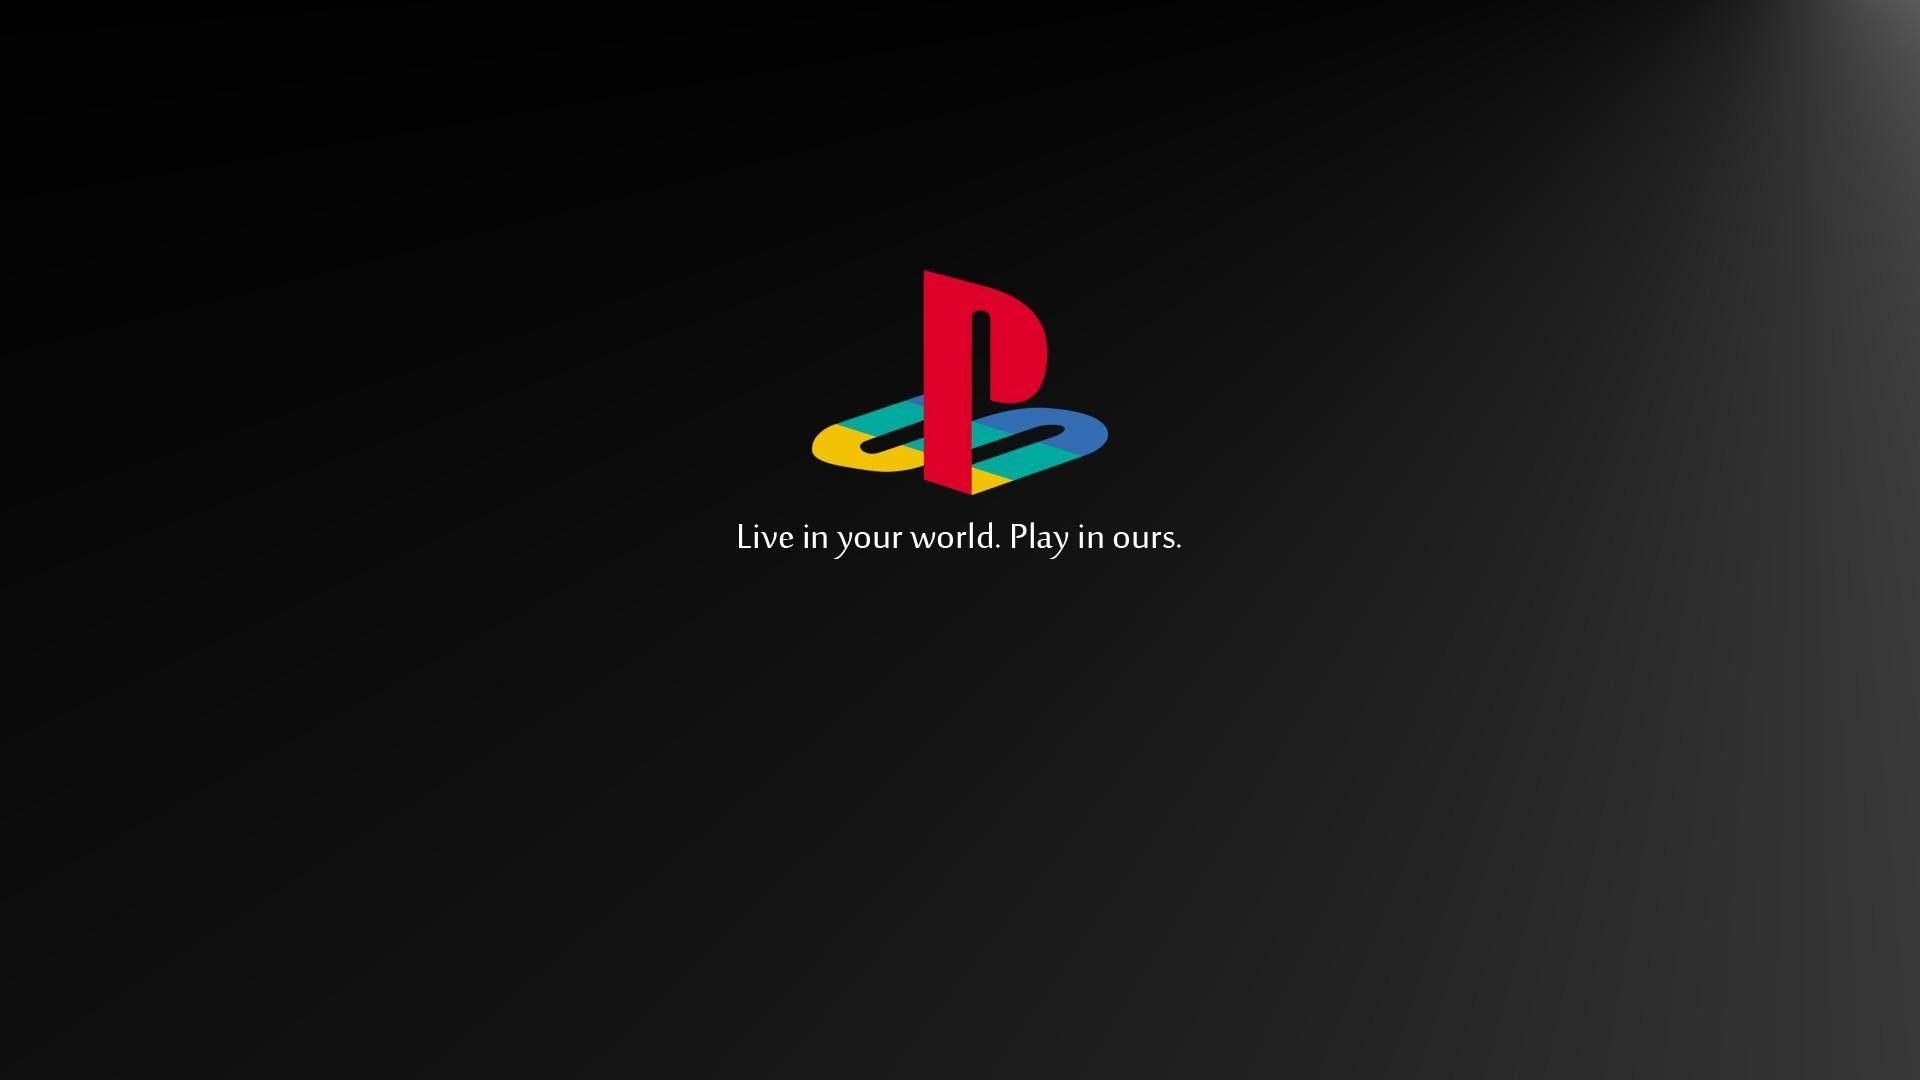 4K PS4 Wallpaper Free 4K PS4 Background